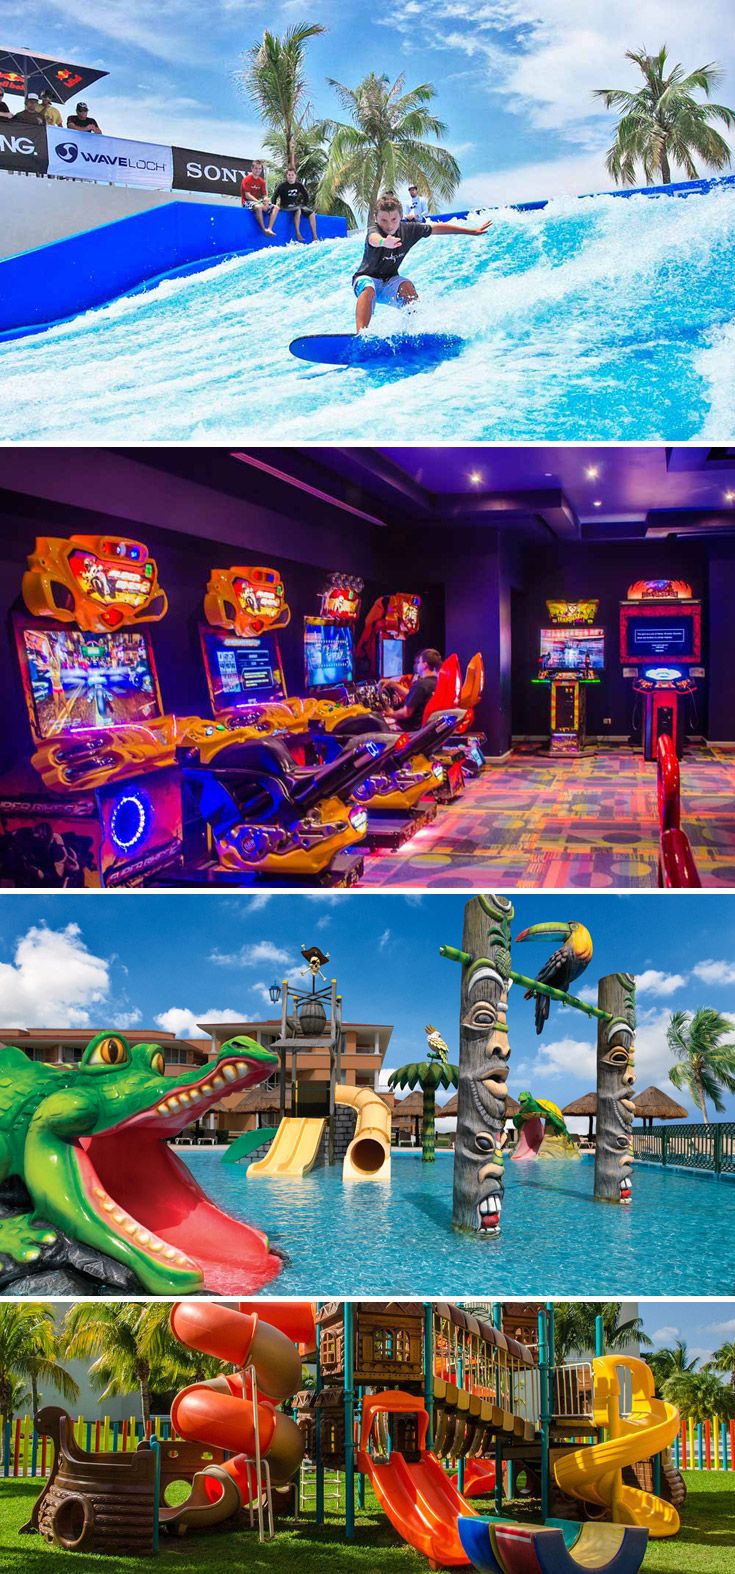 The Moon Palace Cancun Offers Activities For Kids Of All Ages A